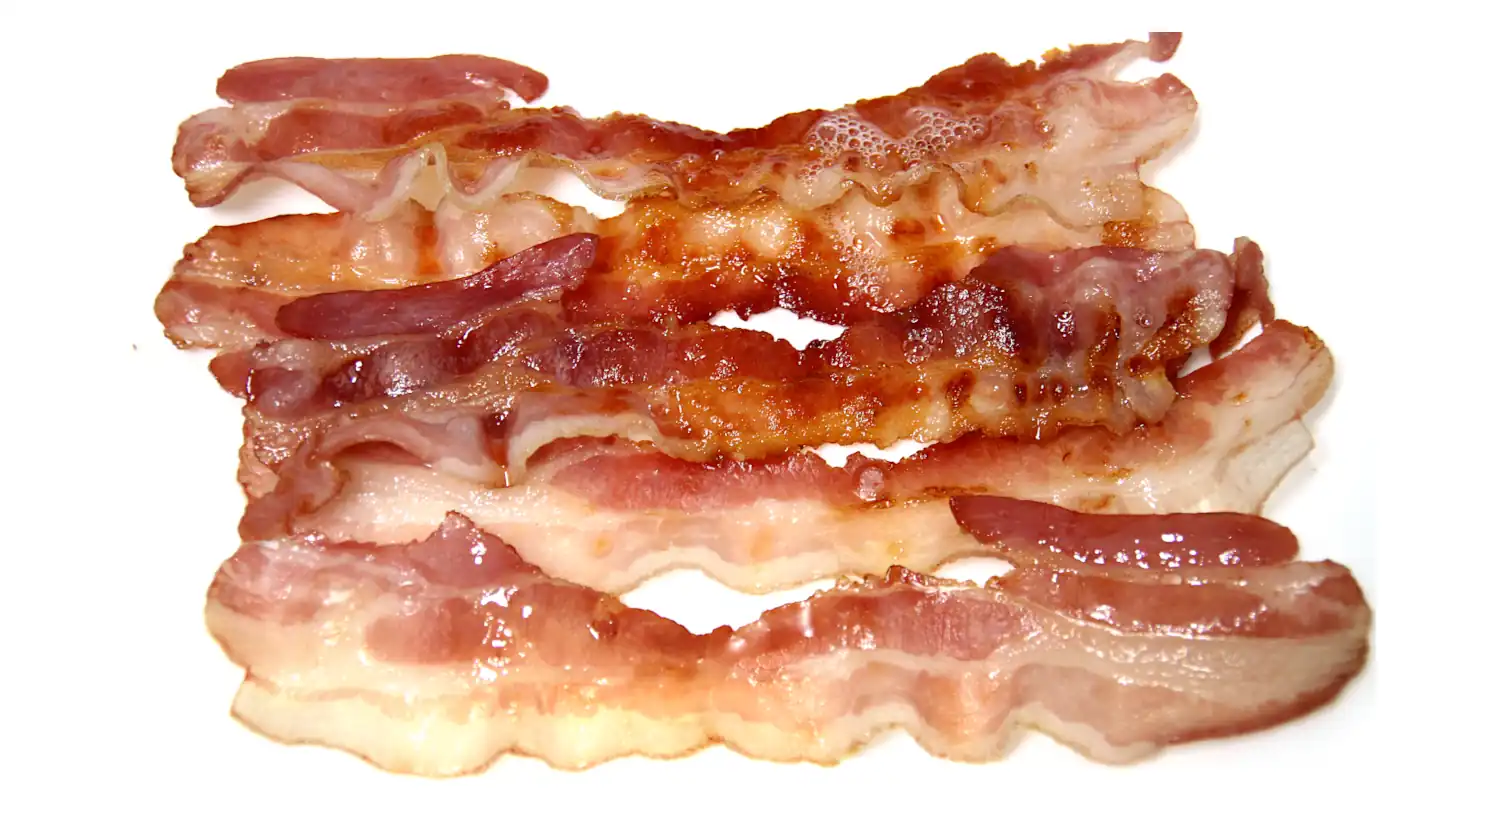 10 Substitutes for Bacon Grease: Animal Fats & Oils